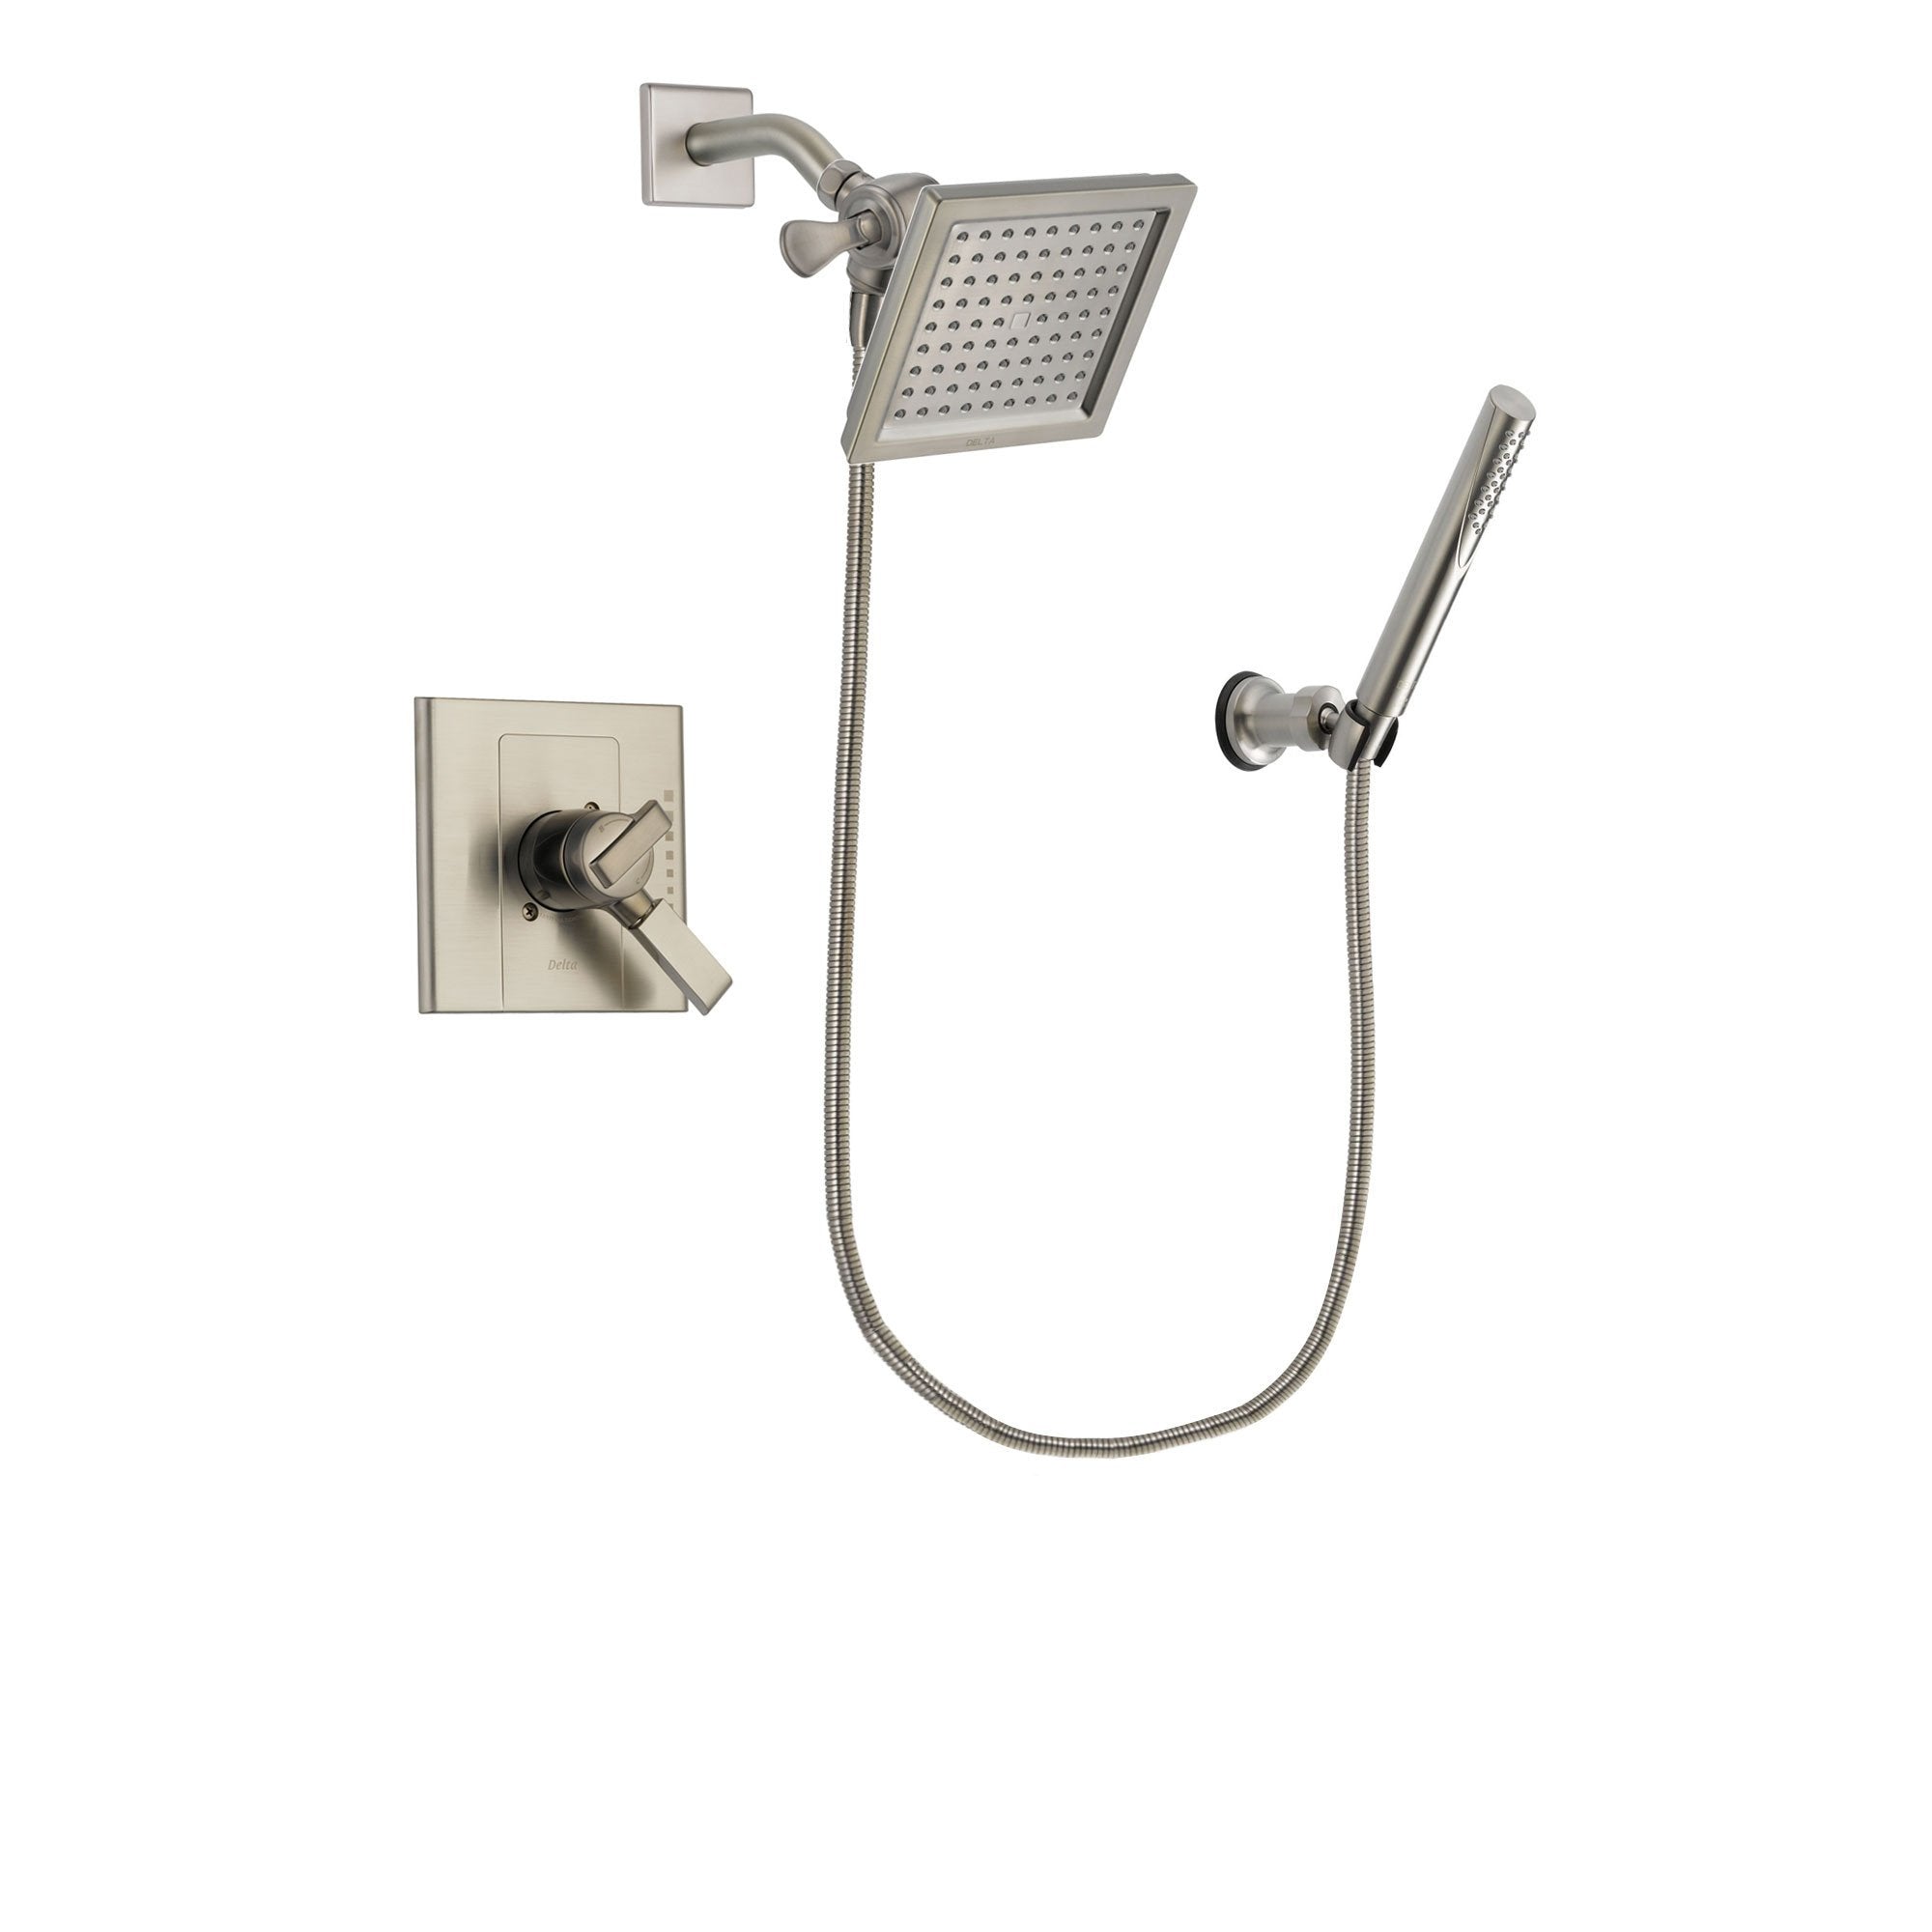 Delta Arzo Stainless Steel Finish Dual Control Shower Faucet System Package with 6.5-inch Square Rain Showerhead and Modern Handheld Shower Spray Includes Rough-in Valve DSP2146V